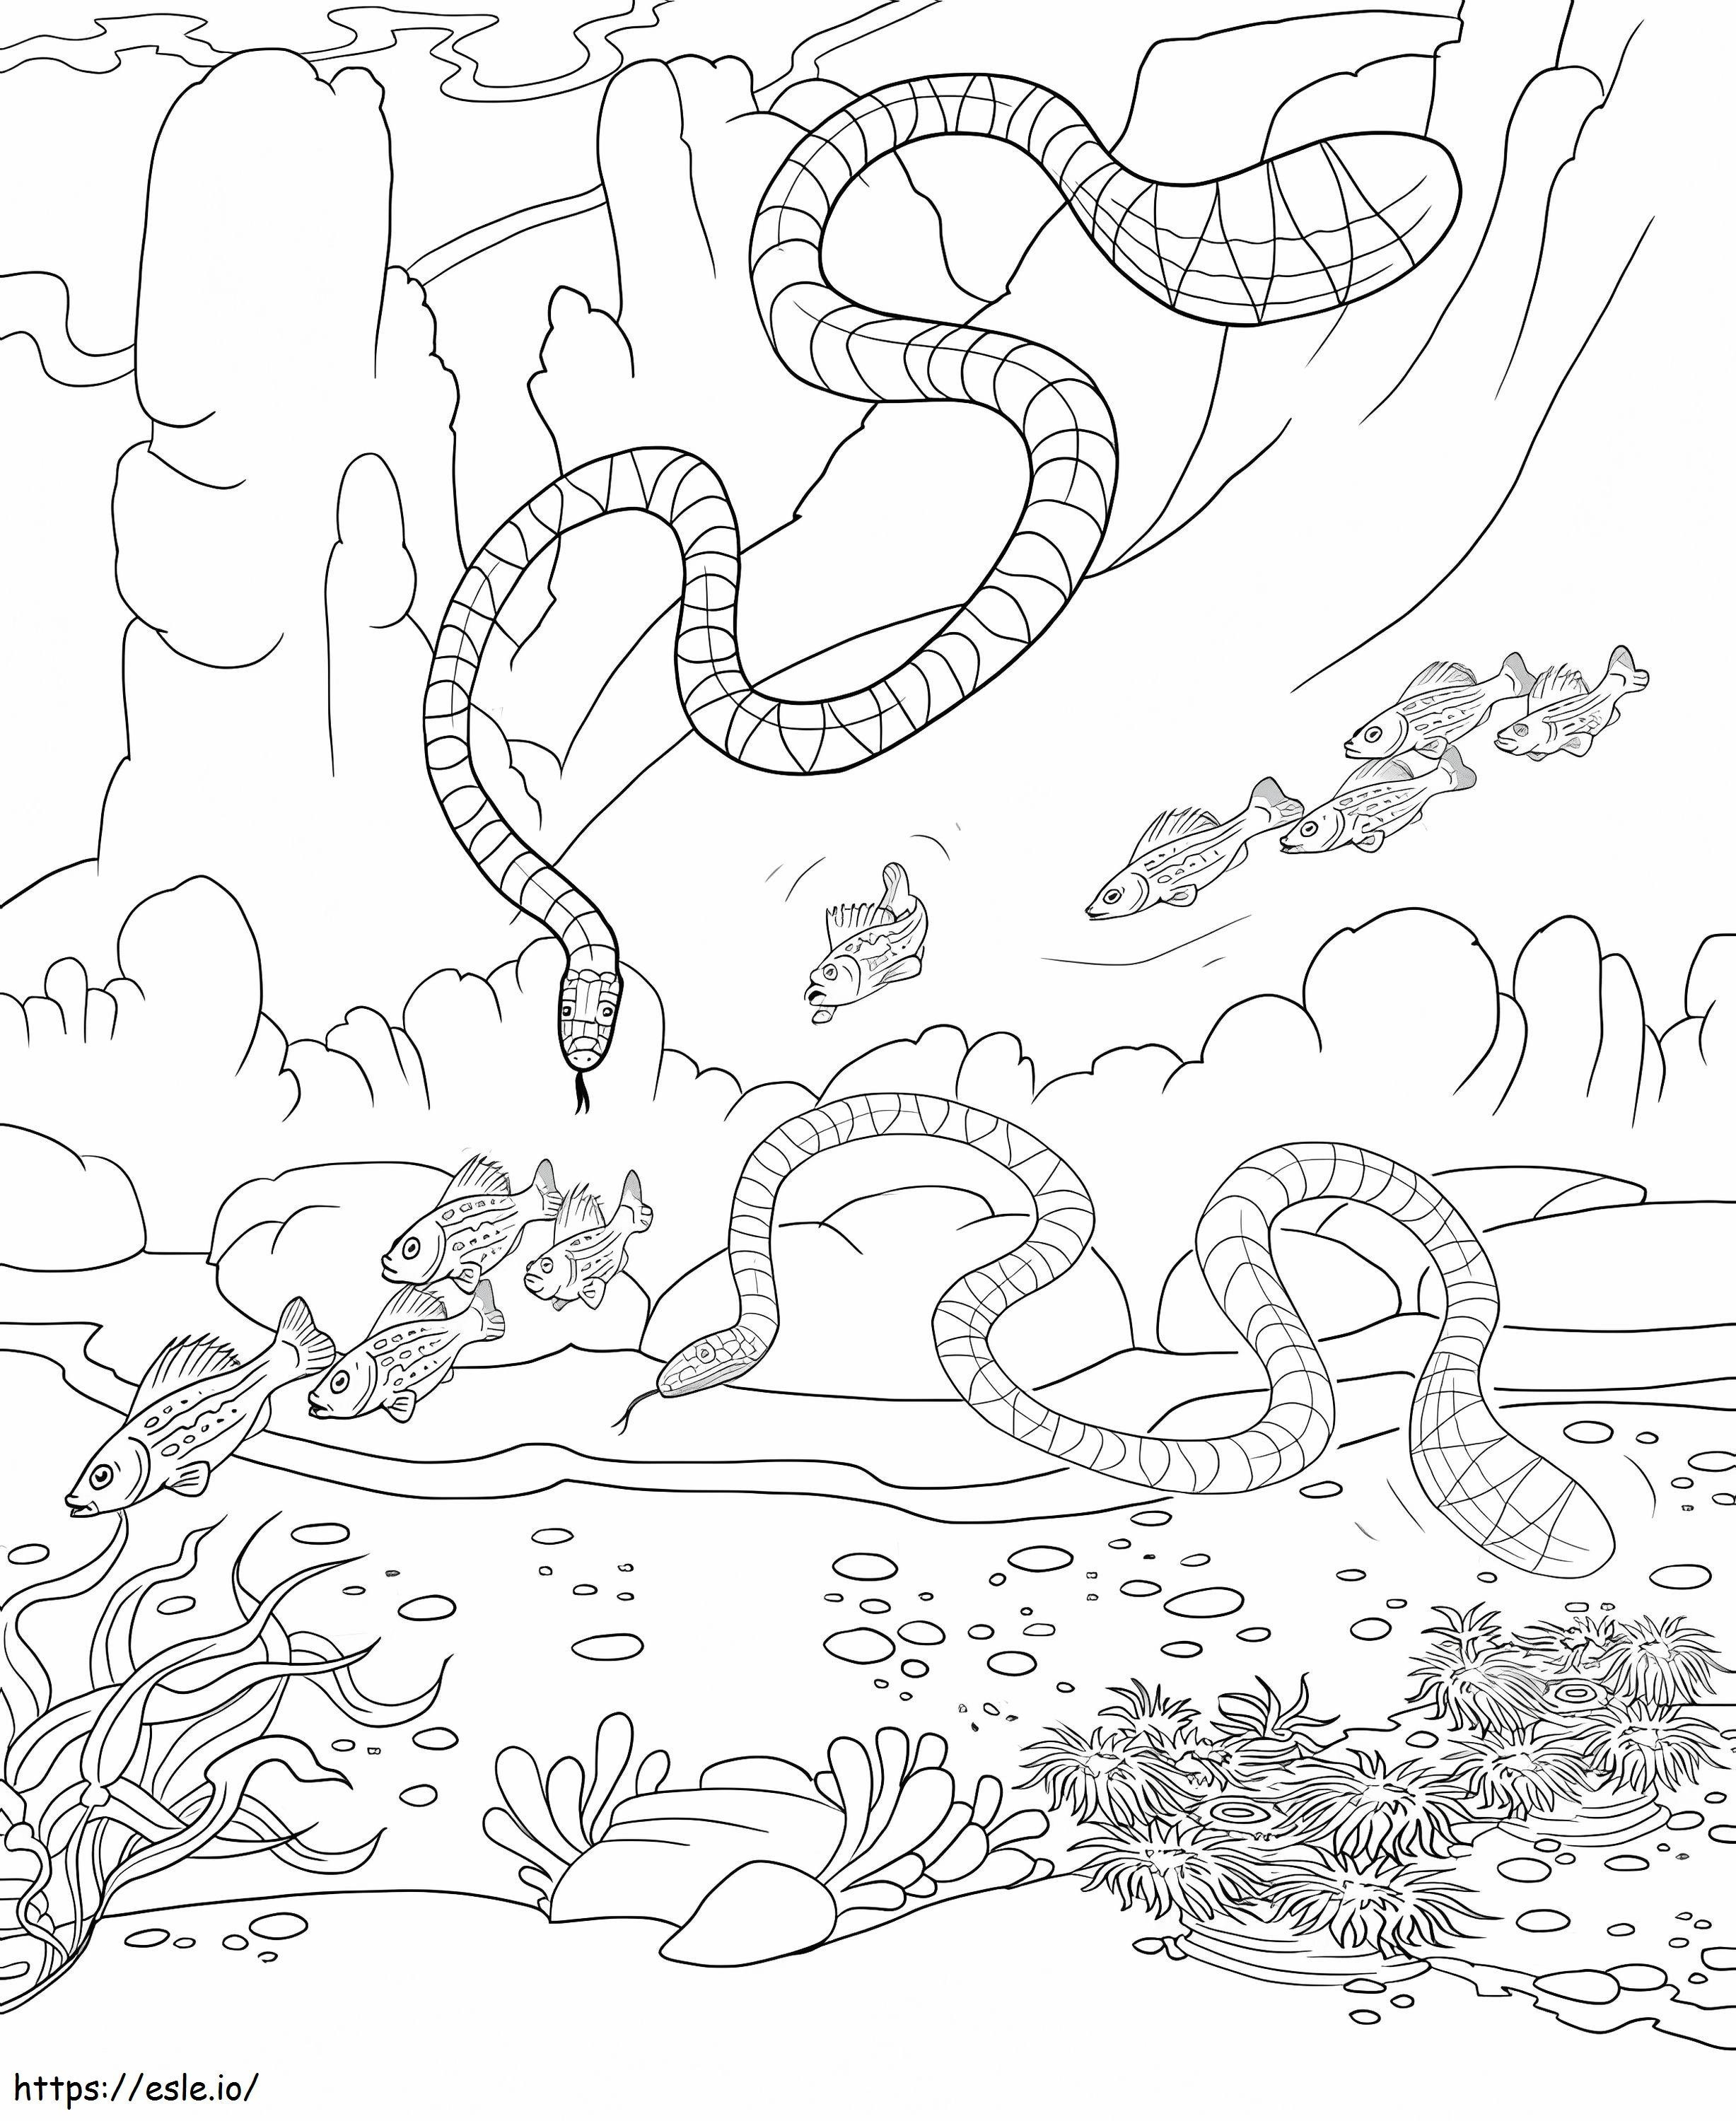 Two Sea Snakes With Fish coloring page